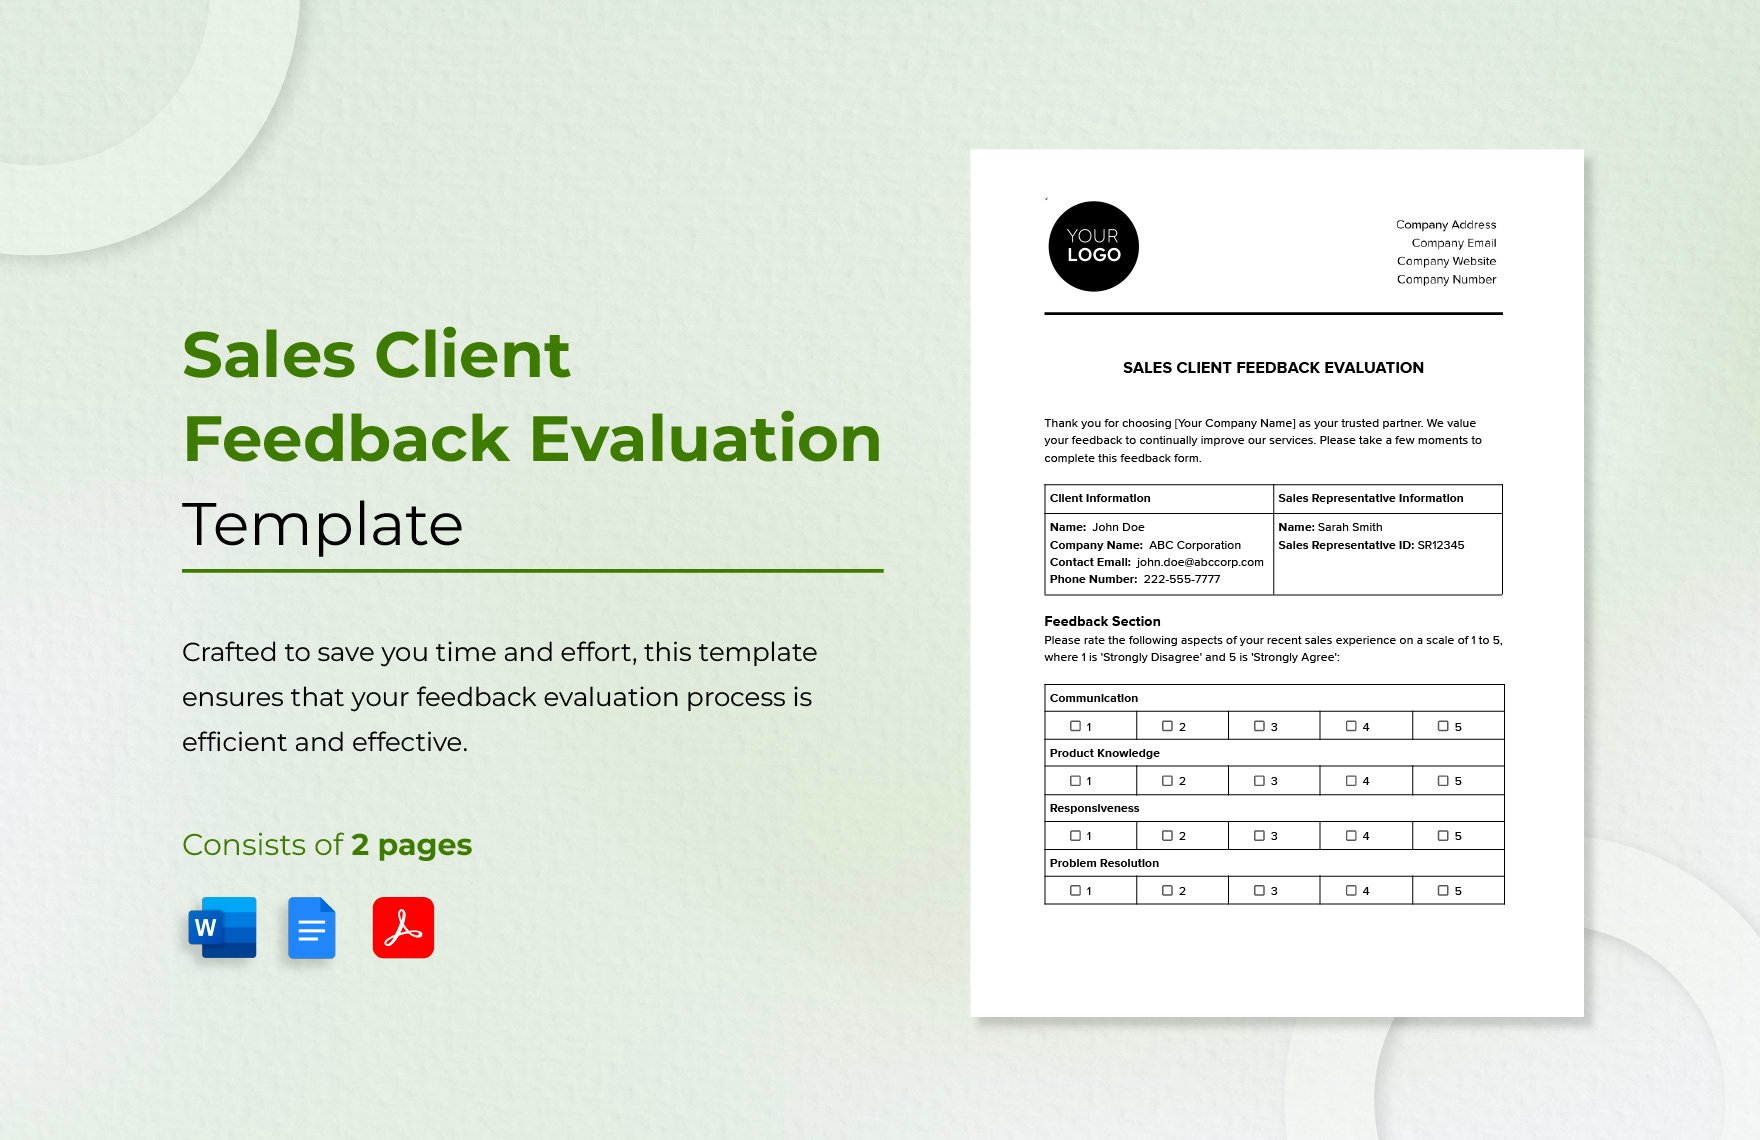 Sales Client Feedback Evaluation Template in Word, Google Docs, PDF